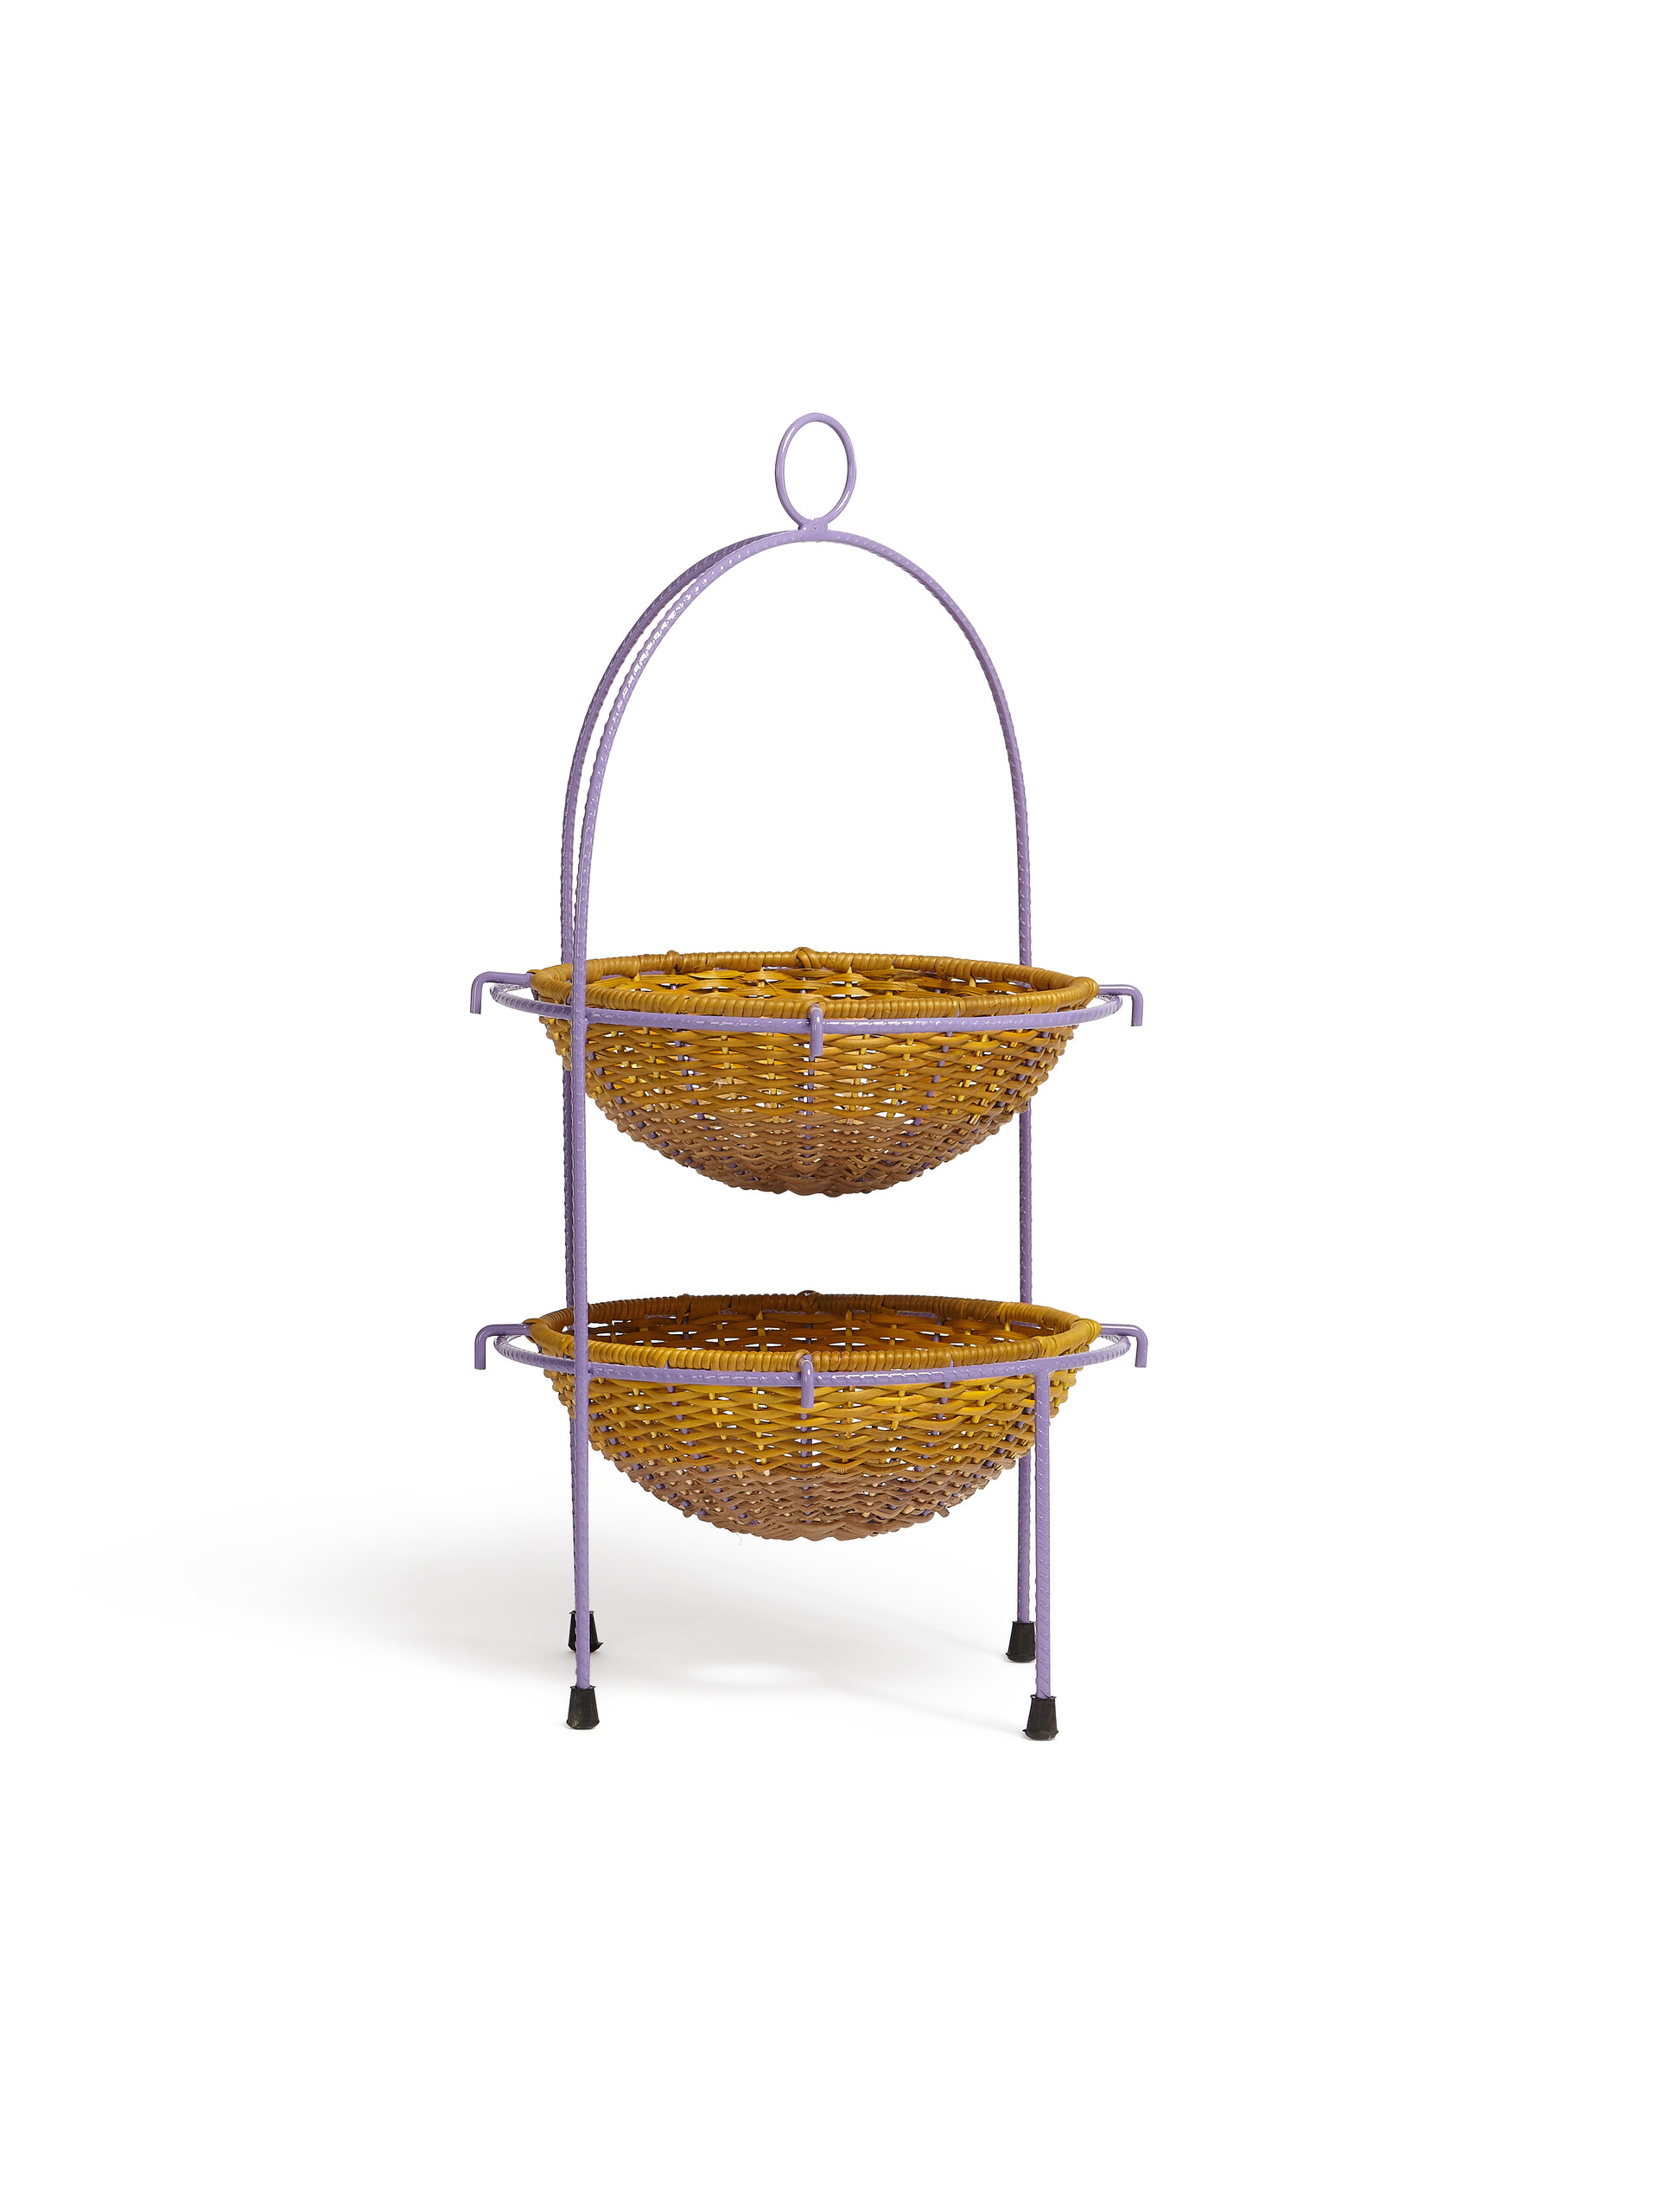 MARNI MARKET round fruitstand in iron red fibre - Accessories - Image 2